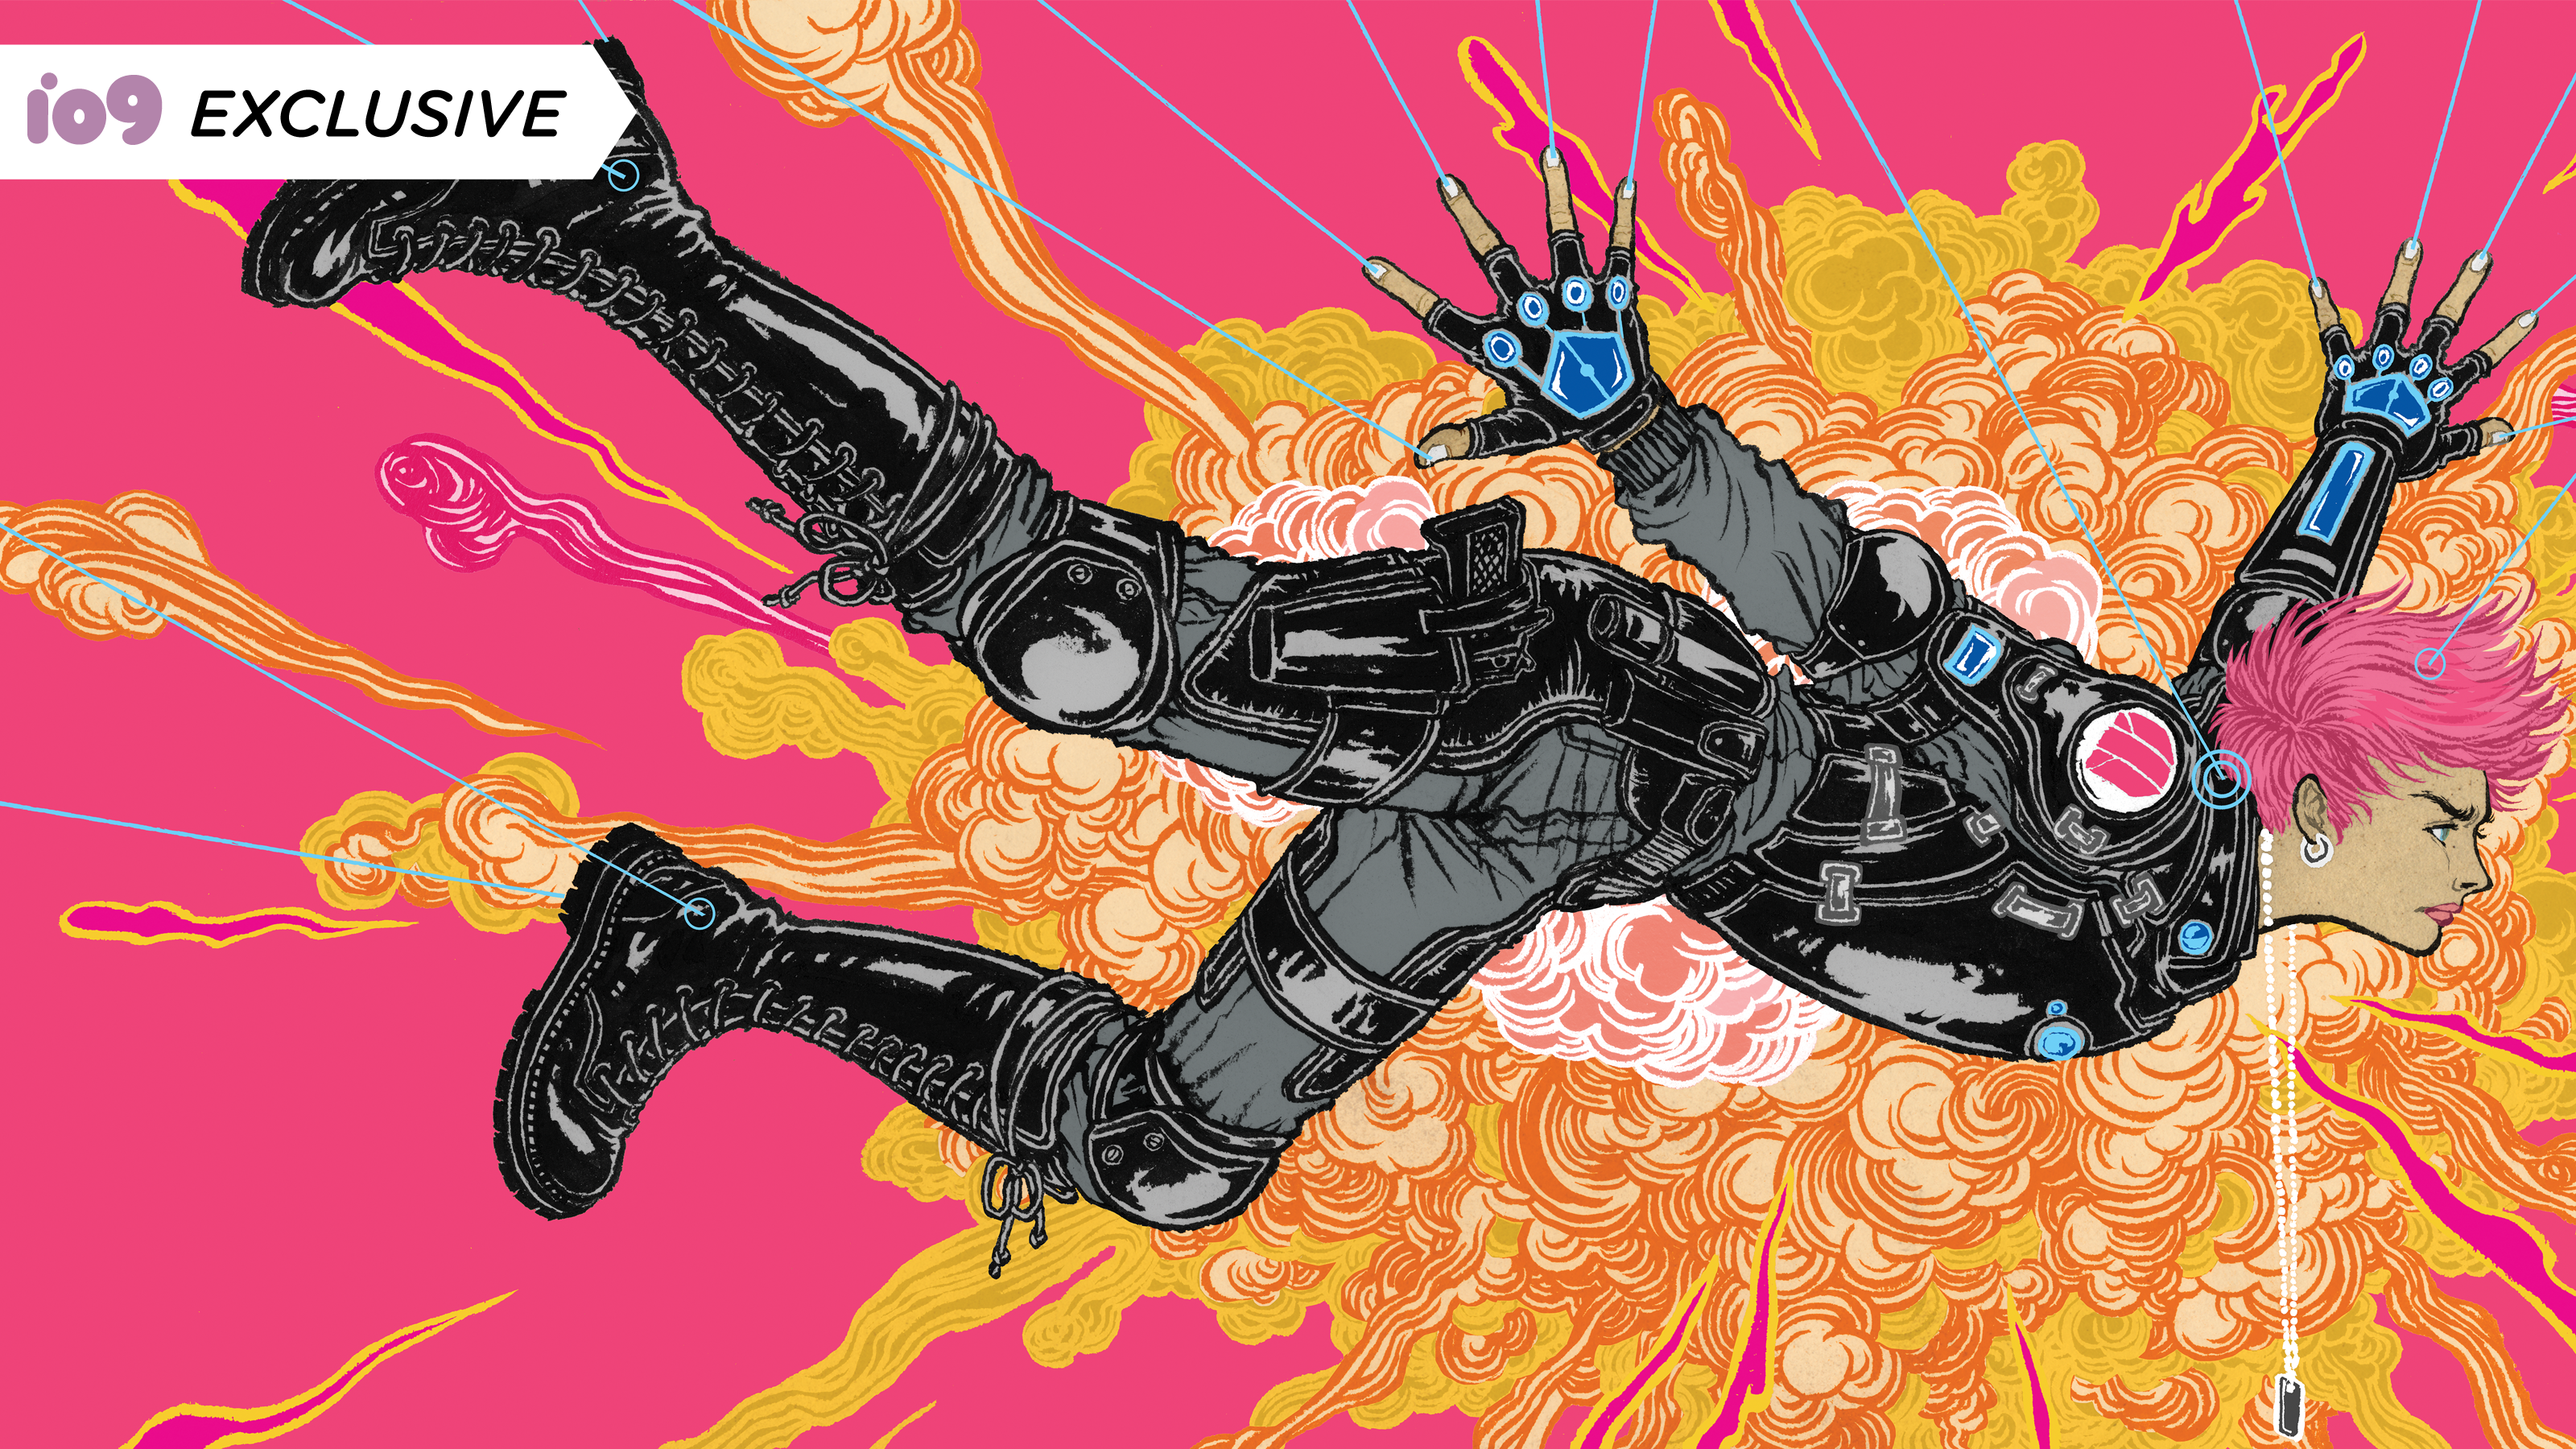 Duncan Jones And Alex De Campi On Why Comics Was The Next Place For Moon And Mute’s World To Go